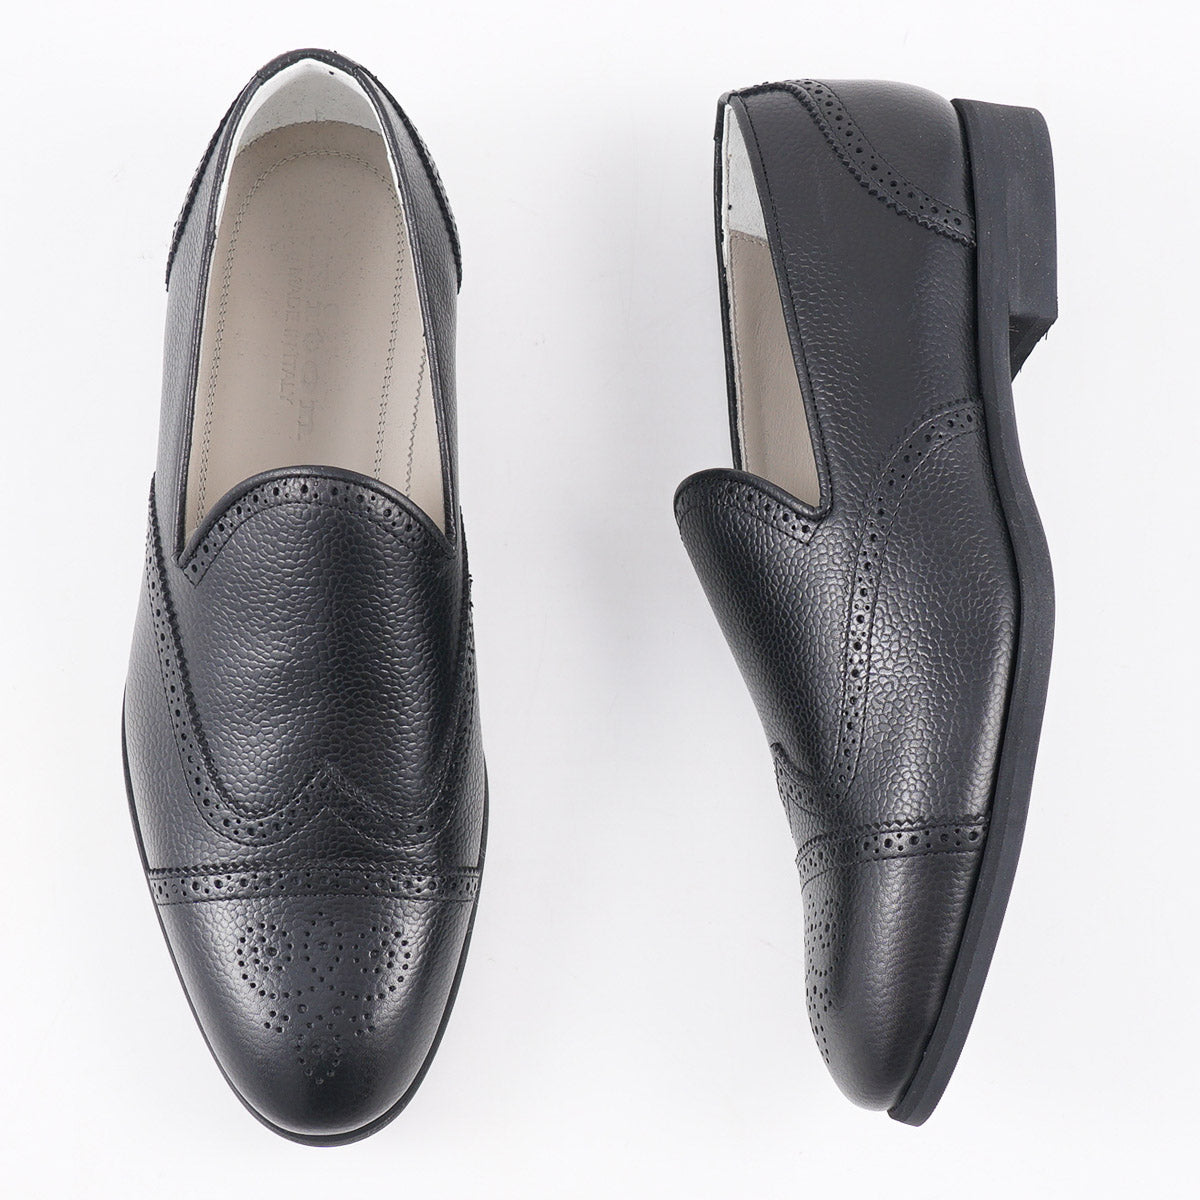 Kiton Soft Pebbled Leather Loafer - Top Shelf Apparel